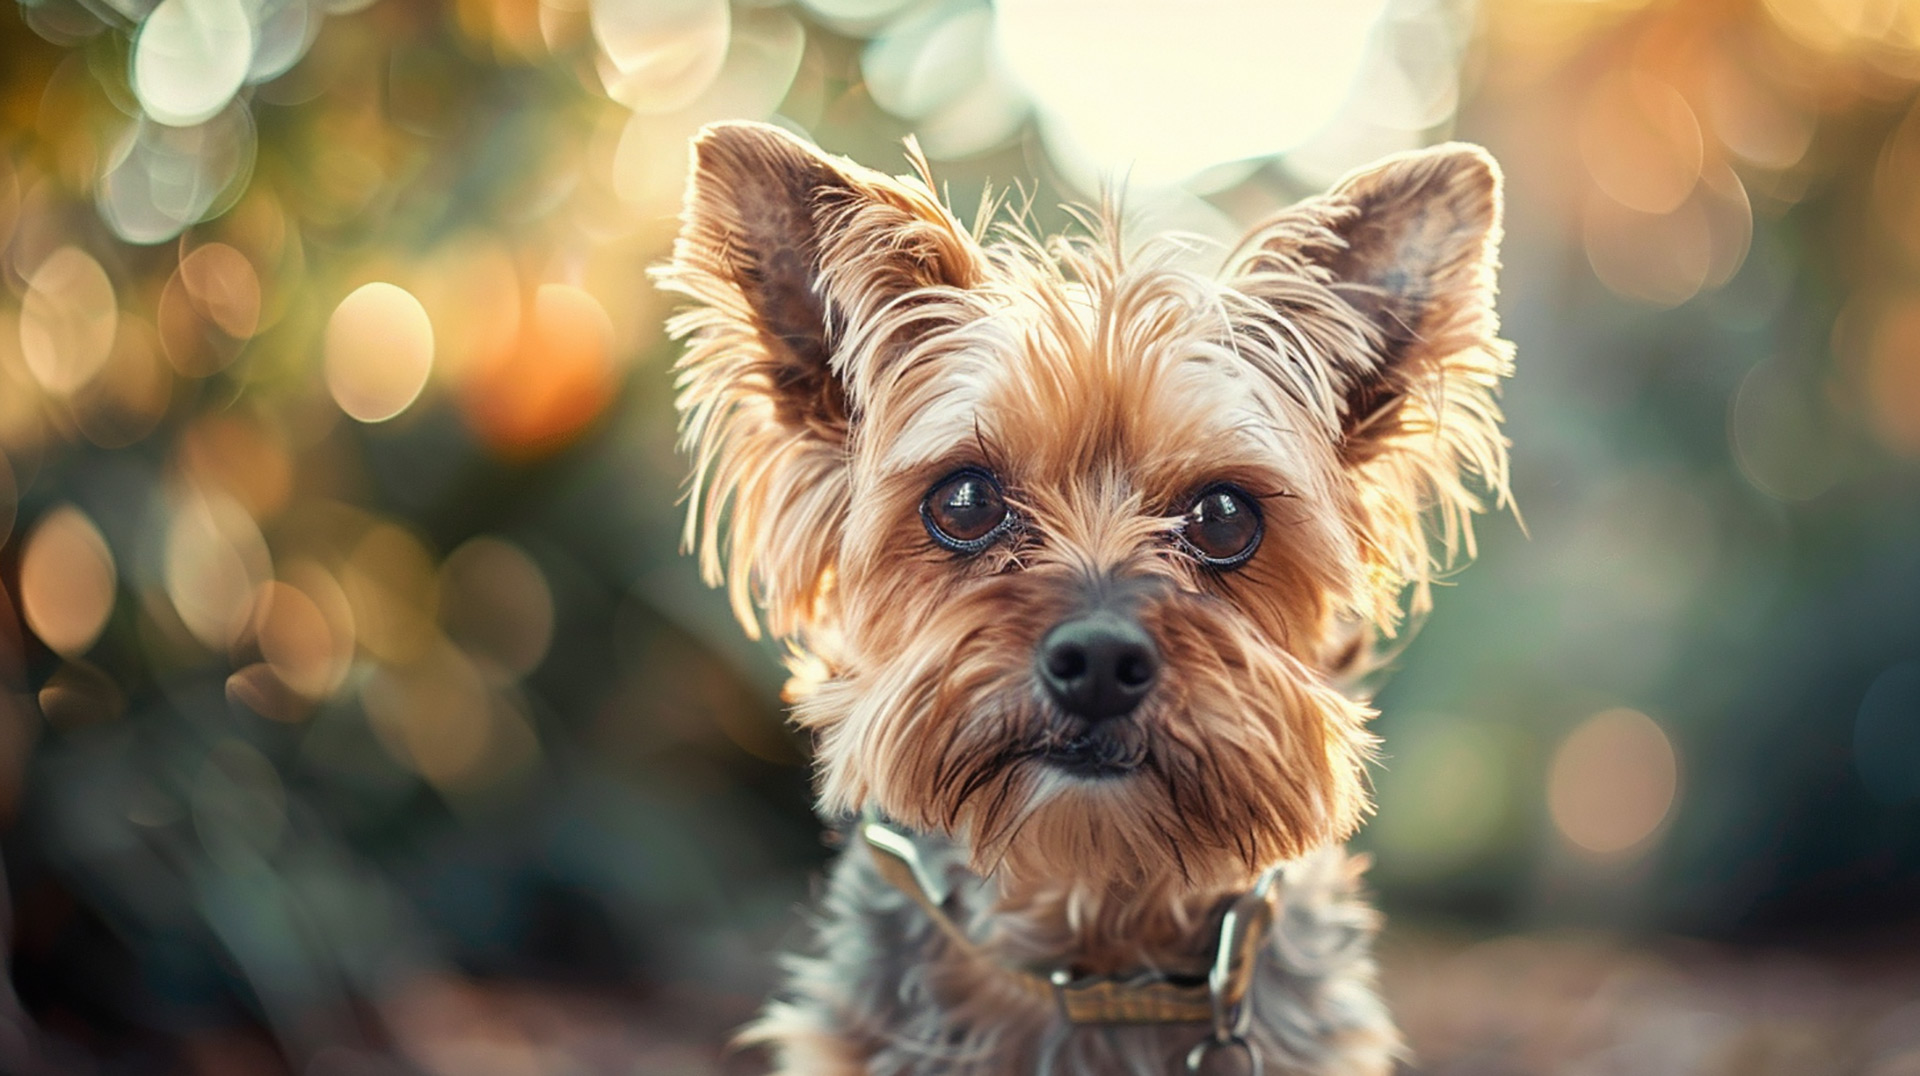 Explore Canine Elegance with AI-Styled Dog Wallpapers